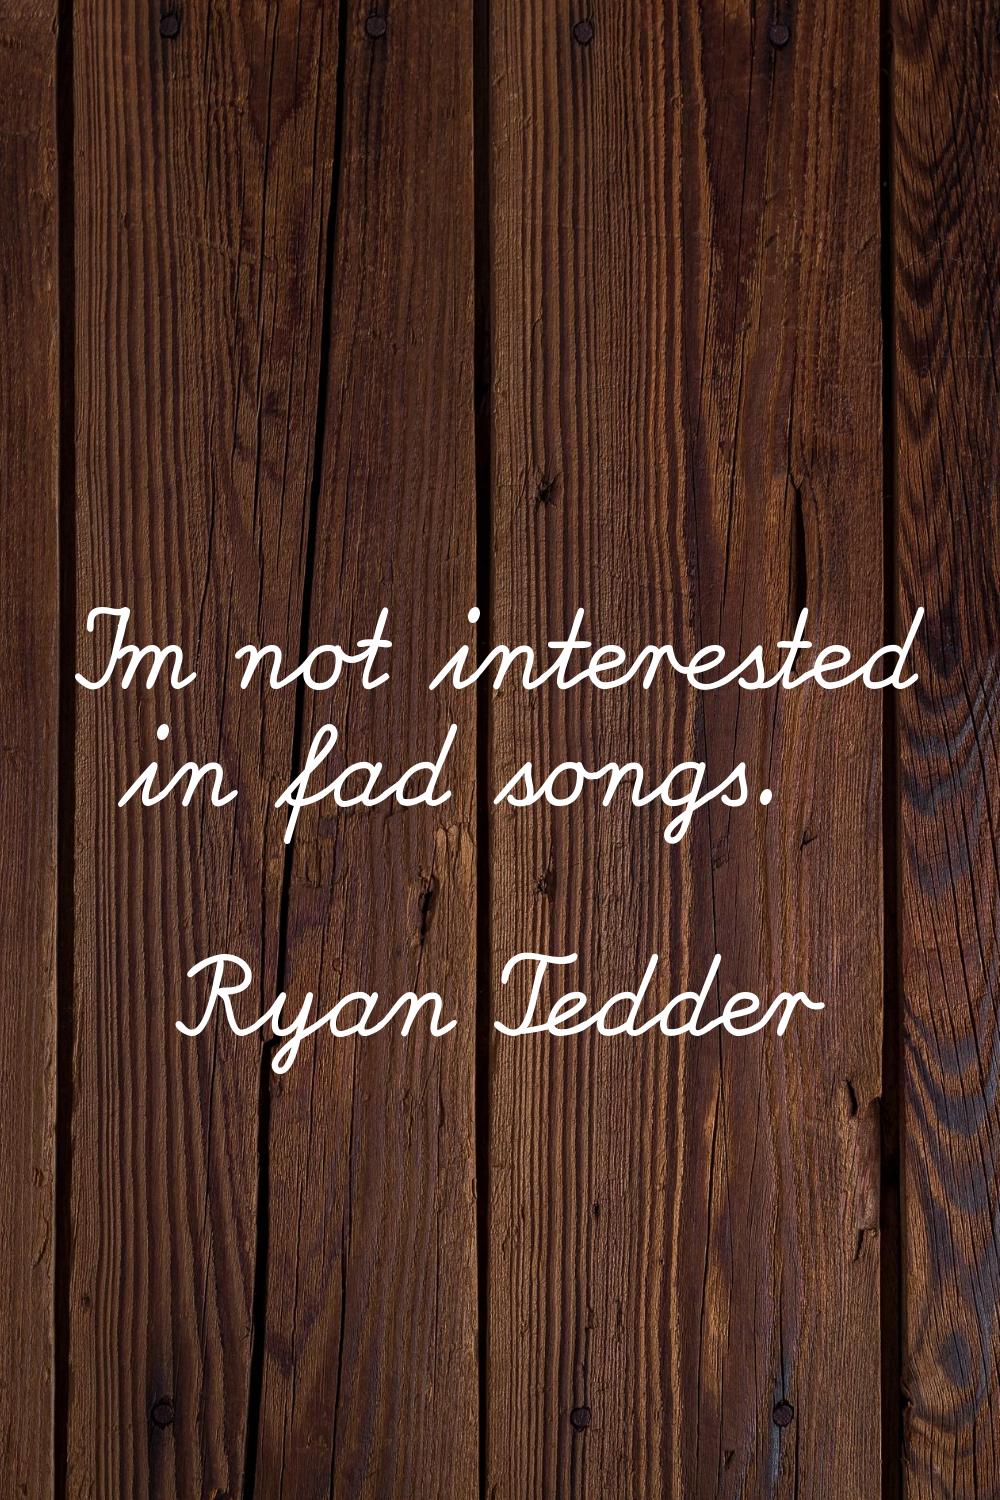 I'm not interested in fad songs.